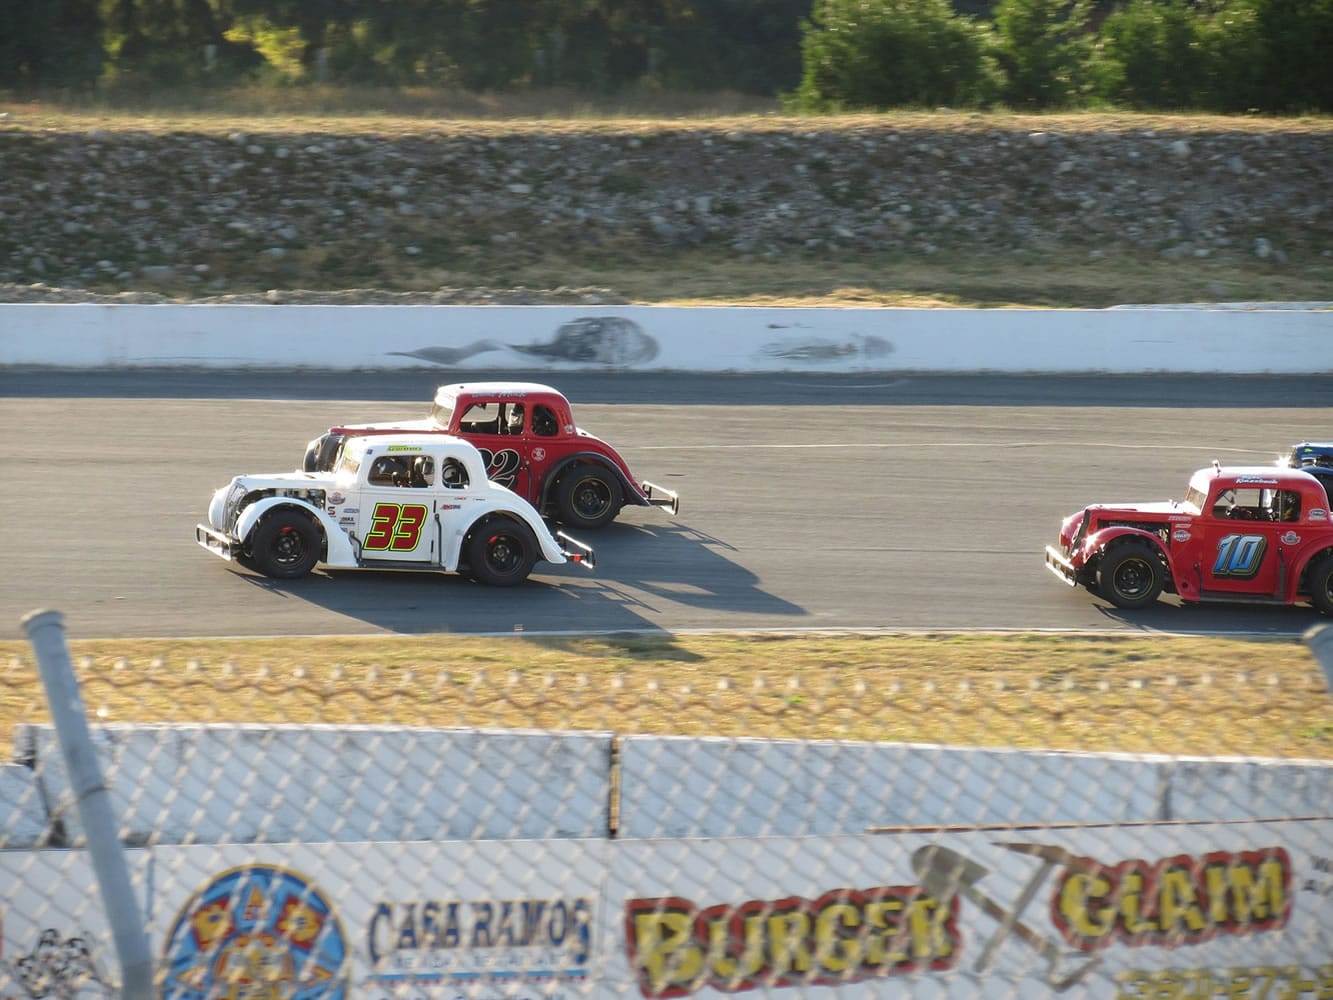 Brooke Schimmel of Woodland drives the No. 33 at Legend Race Car Series races at South Sound Speedway near Rochester.